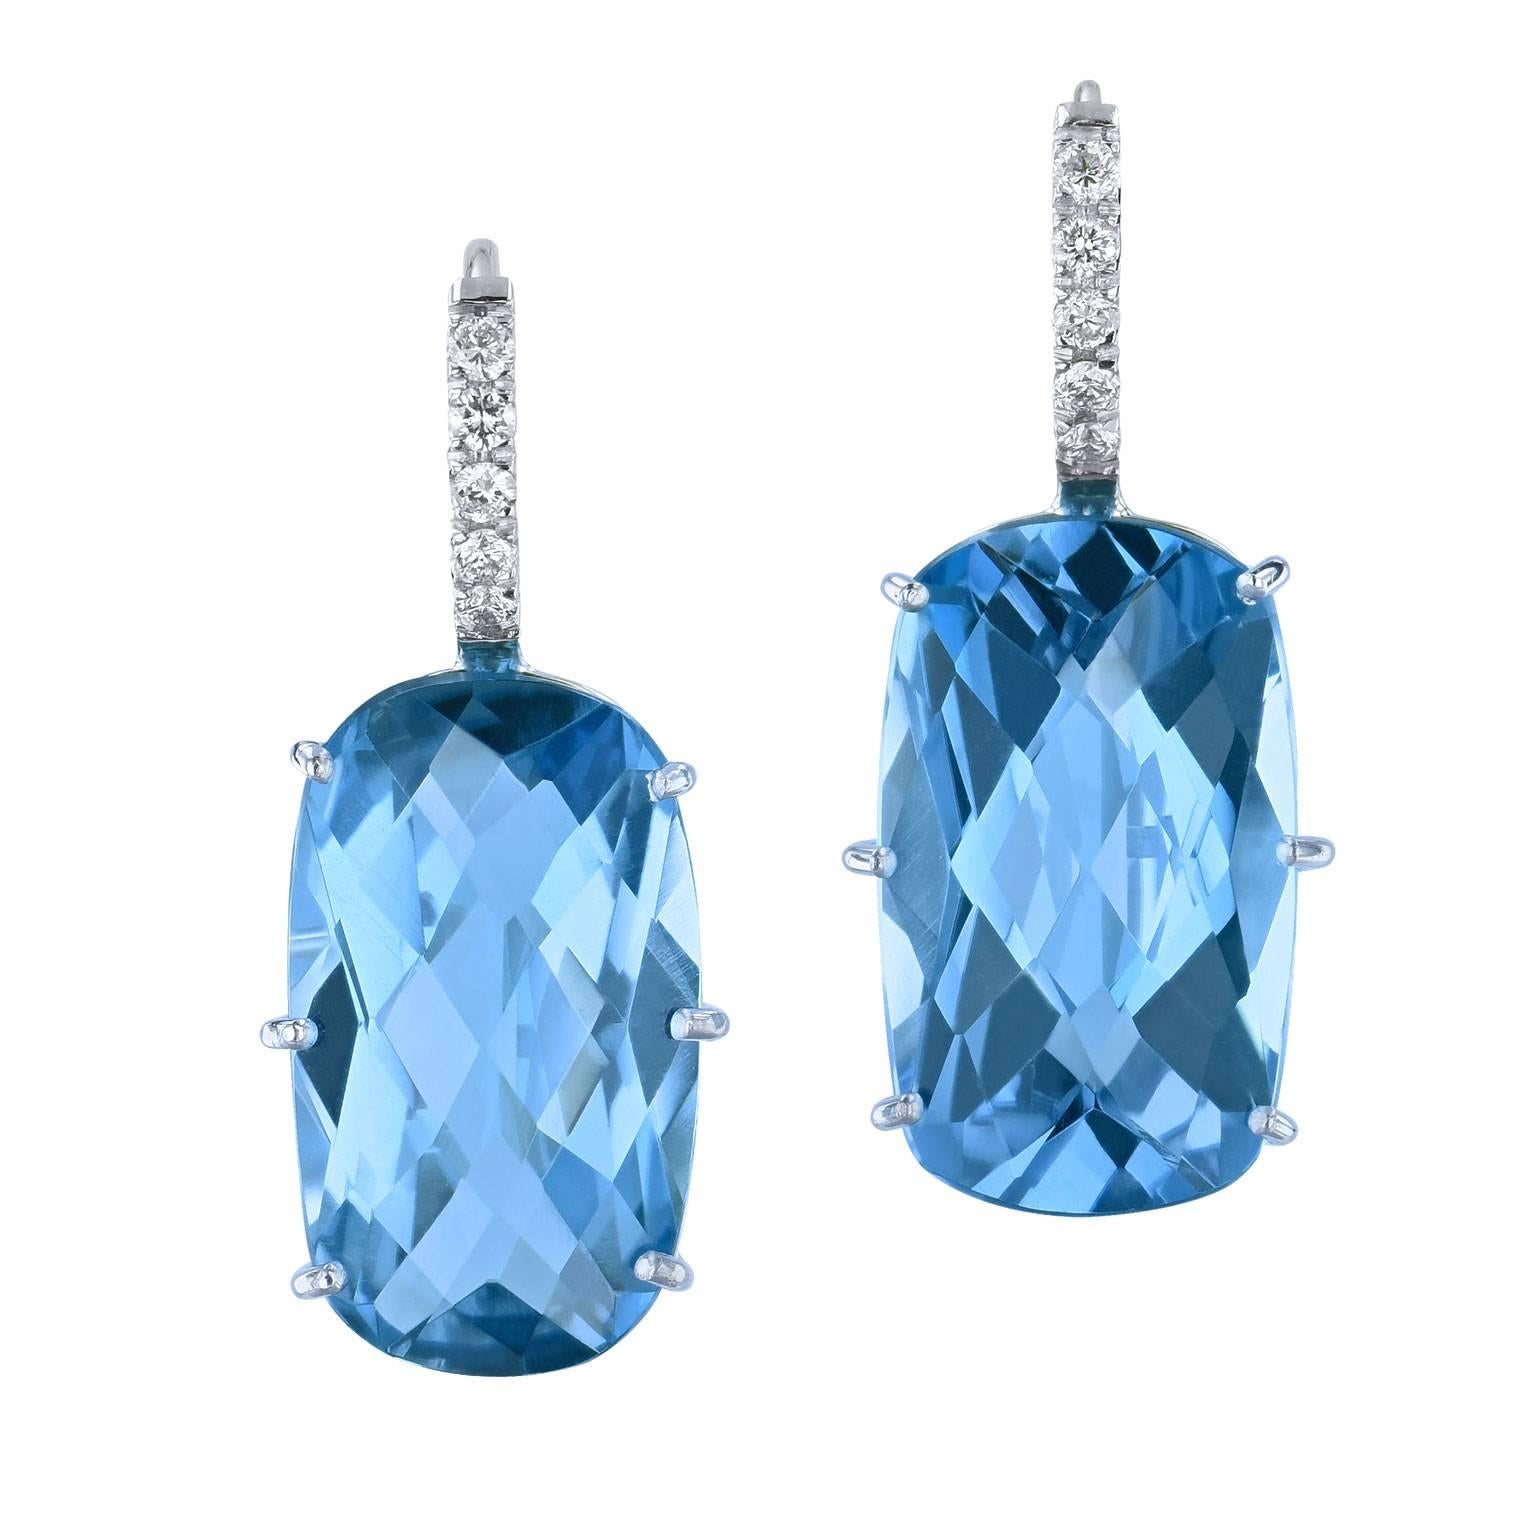 20.34 Carat Blue Topaz with Diamond Pave Earrings in 18 Karat White Gold 